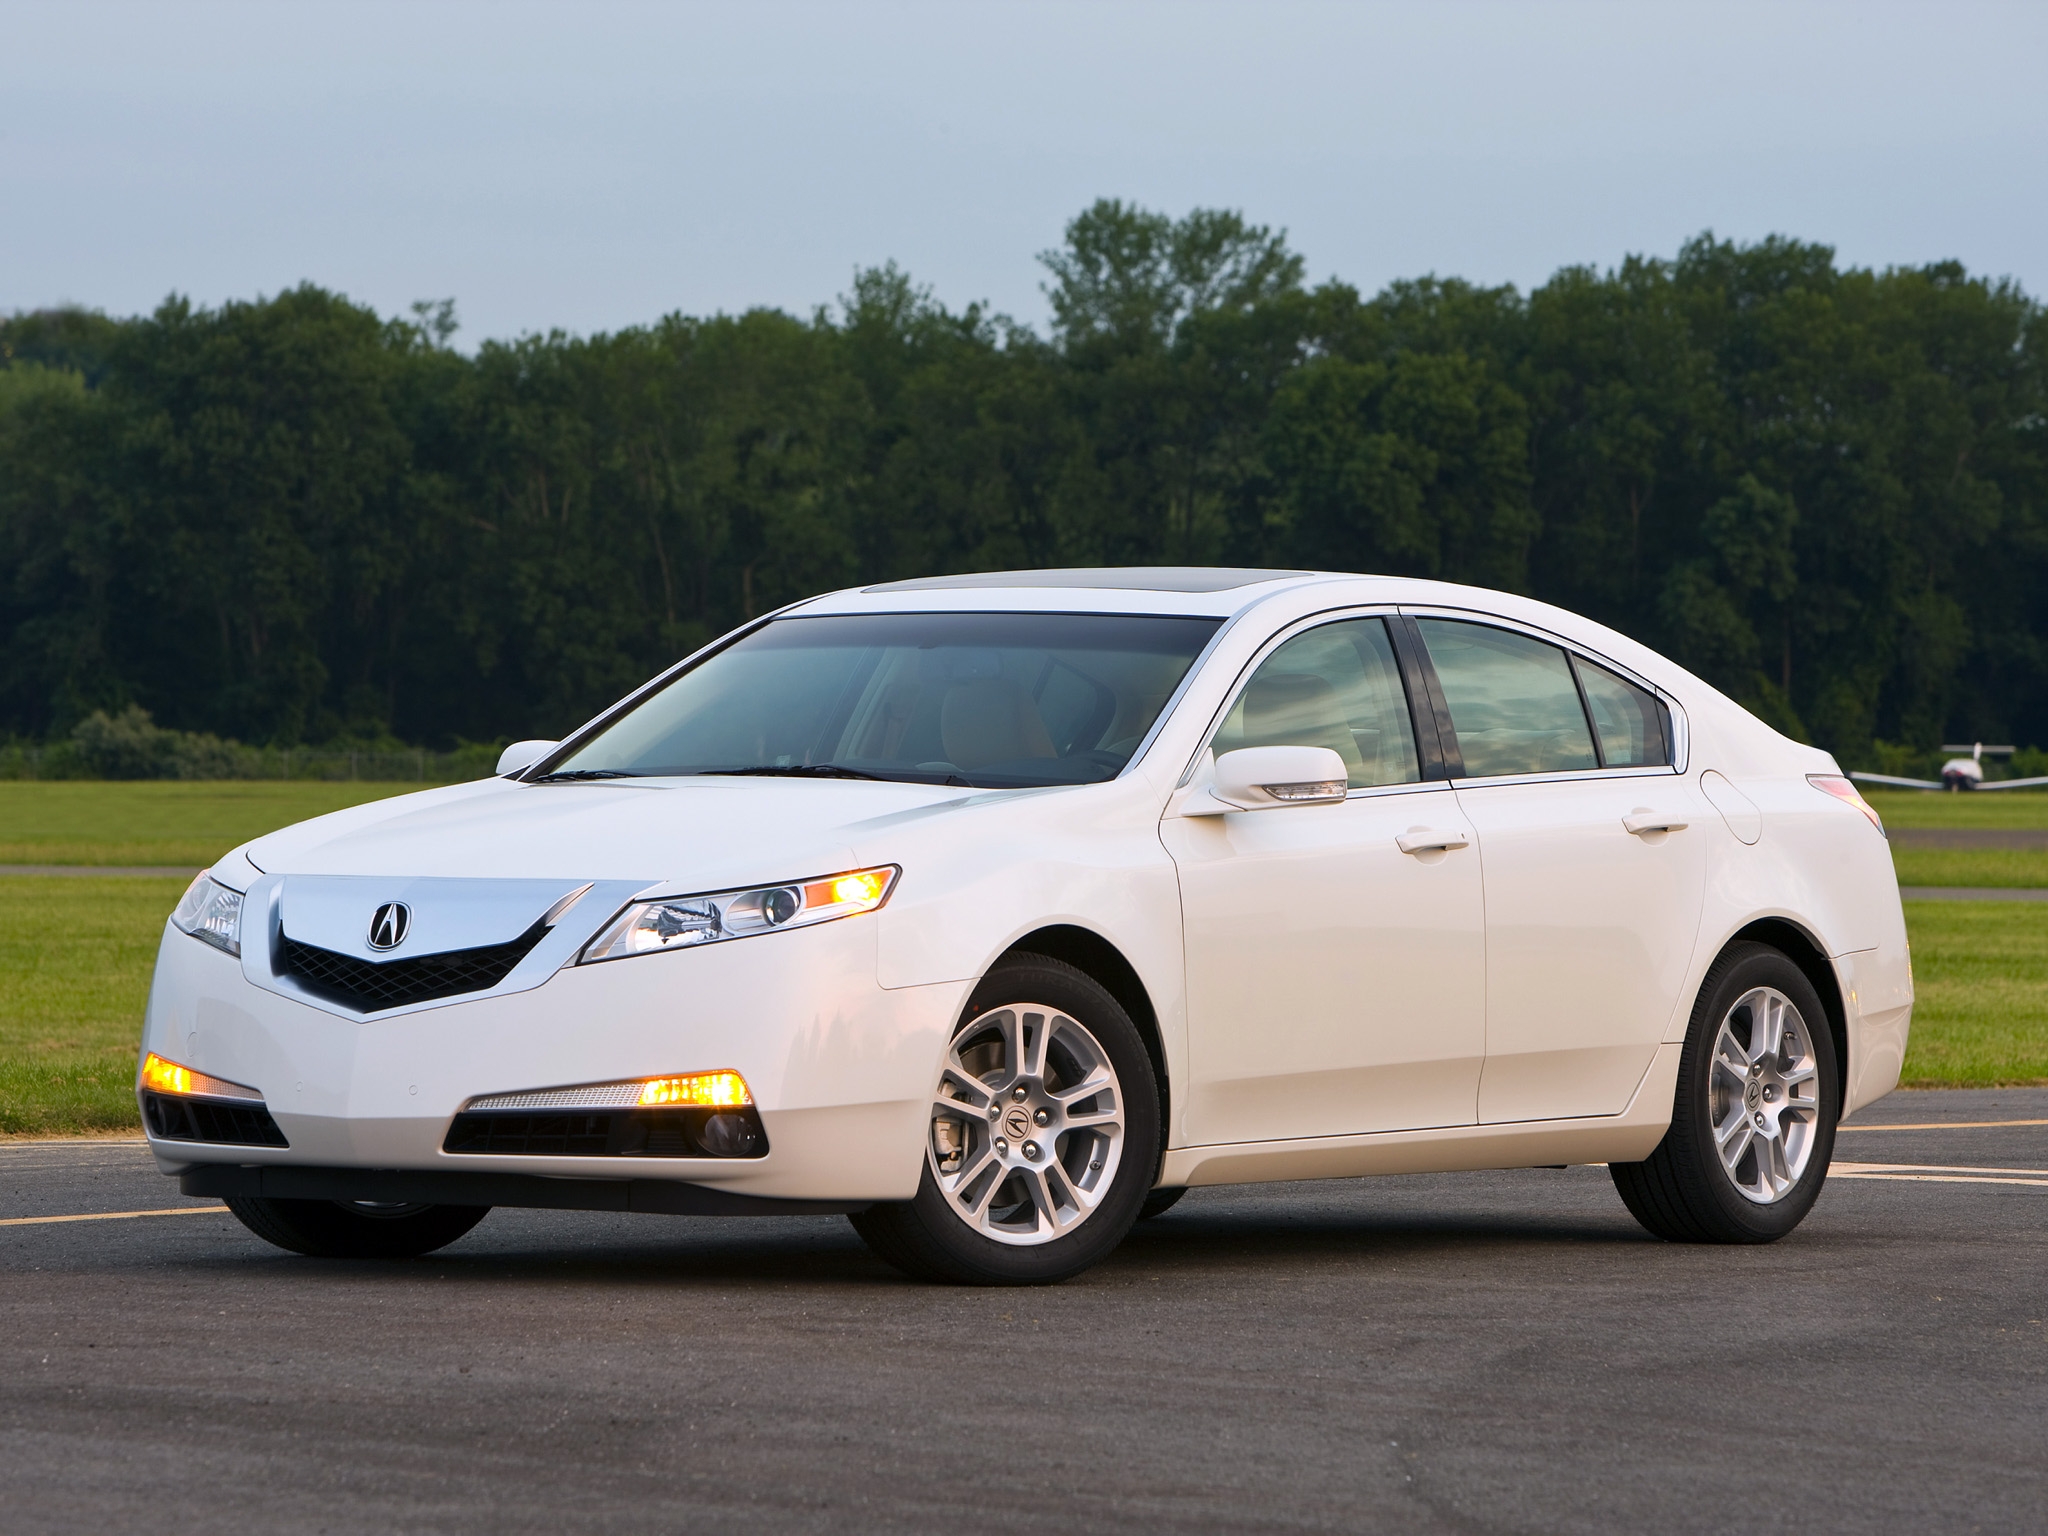 cars, auto, nature, trees, grass, acura, white, side view, style, akura, 2008, tl High Definition image